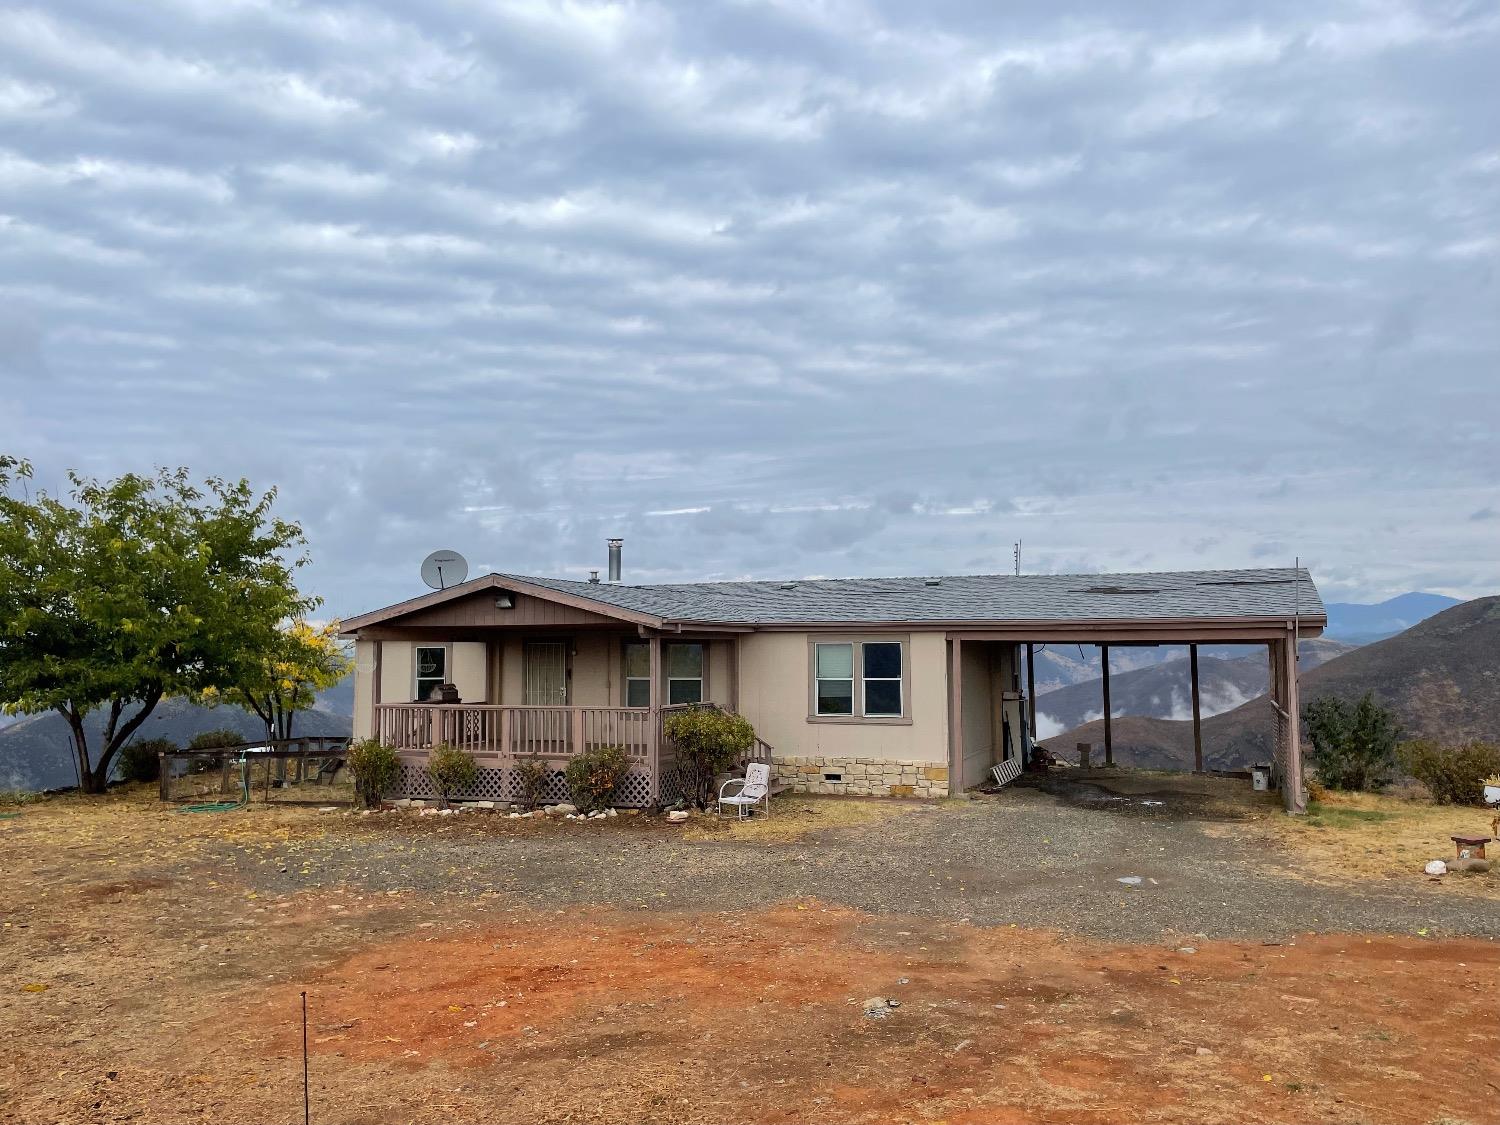 Photo of 4904 Buffalo Gulch Rd in Midpines, CA